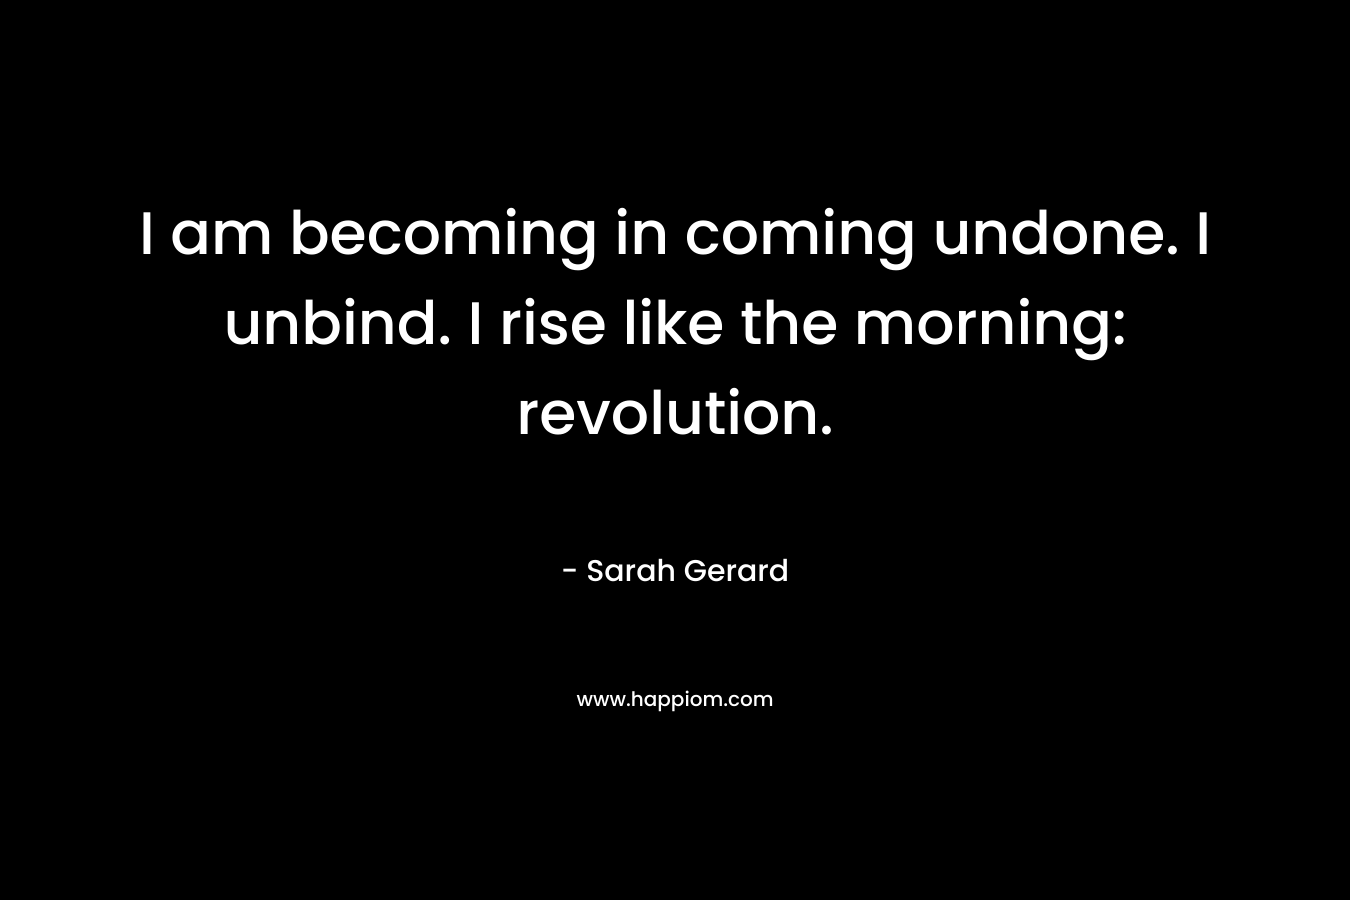 I am becoming in coming undone. I unbind. I rise like the morning: revolution.